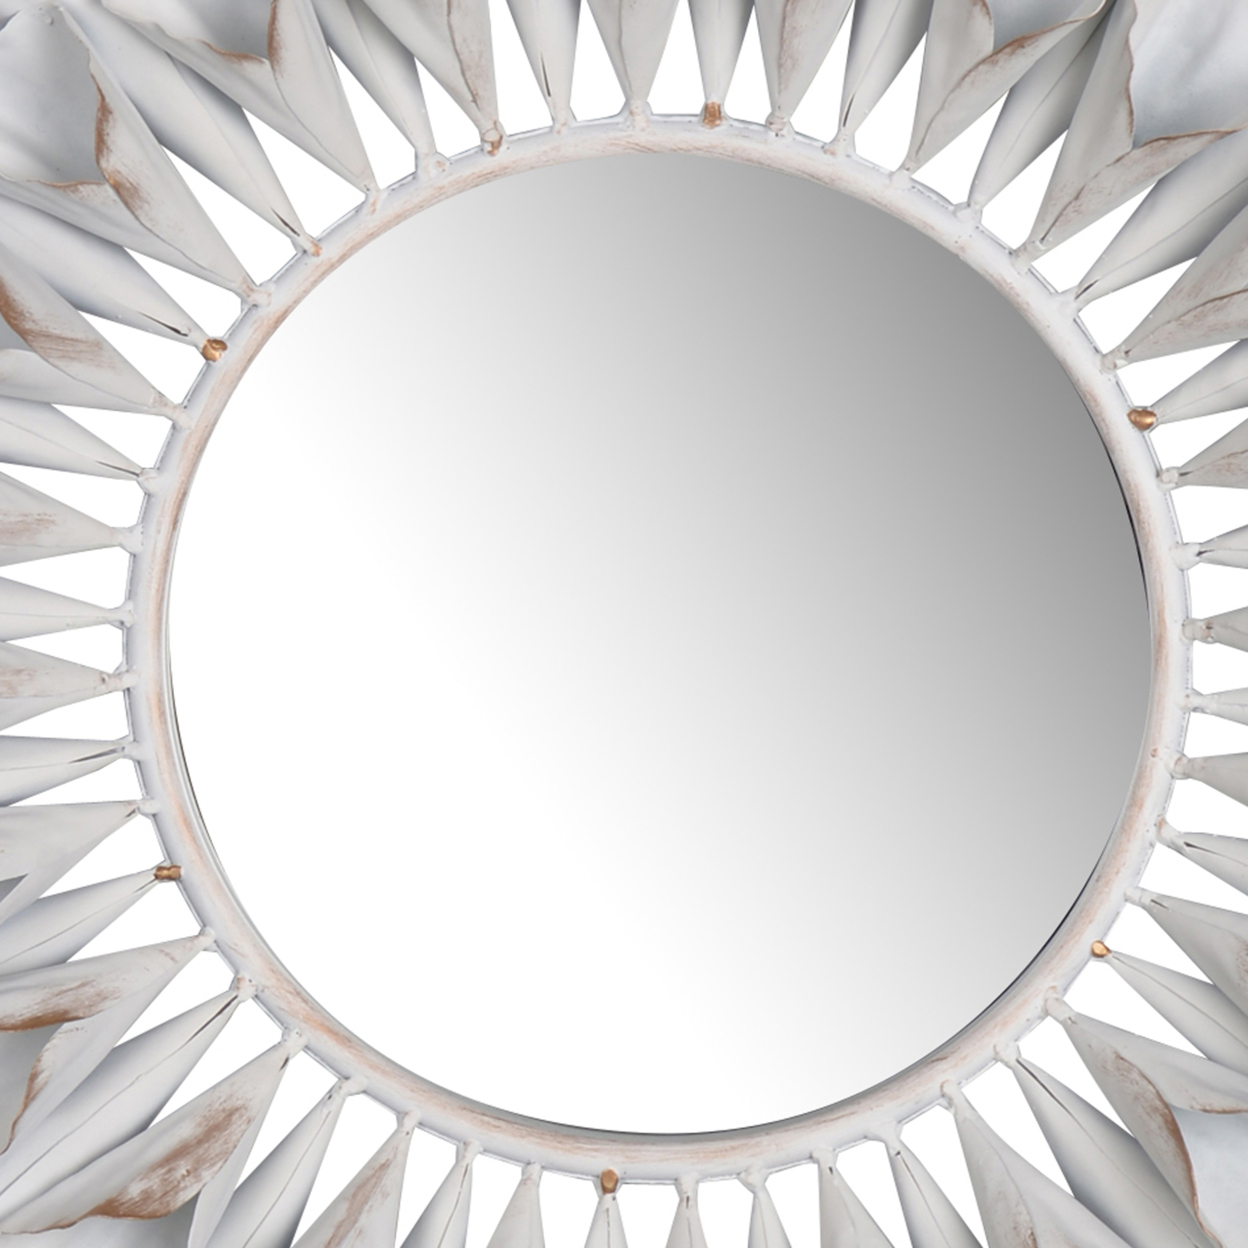 Decorative Metal Wall Mirror With Floral Accents, White And Clear- Saltoro Sherpi